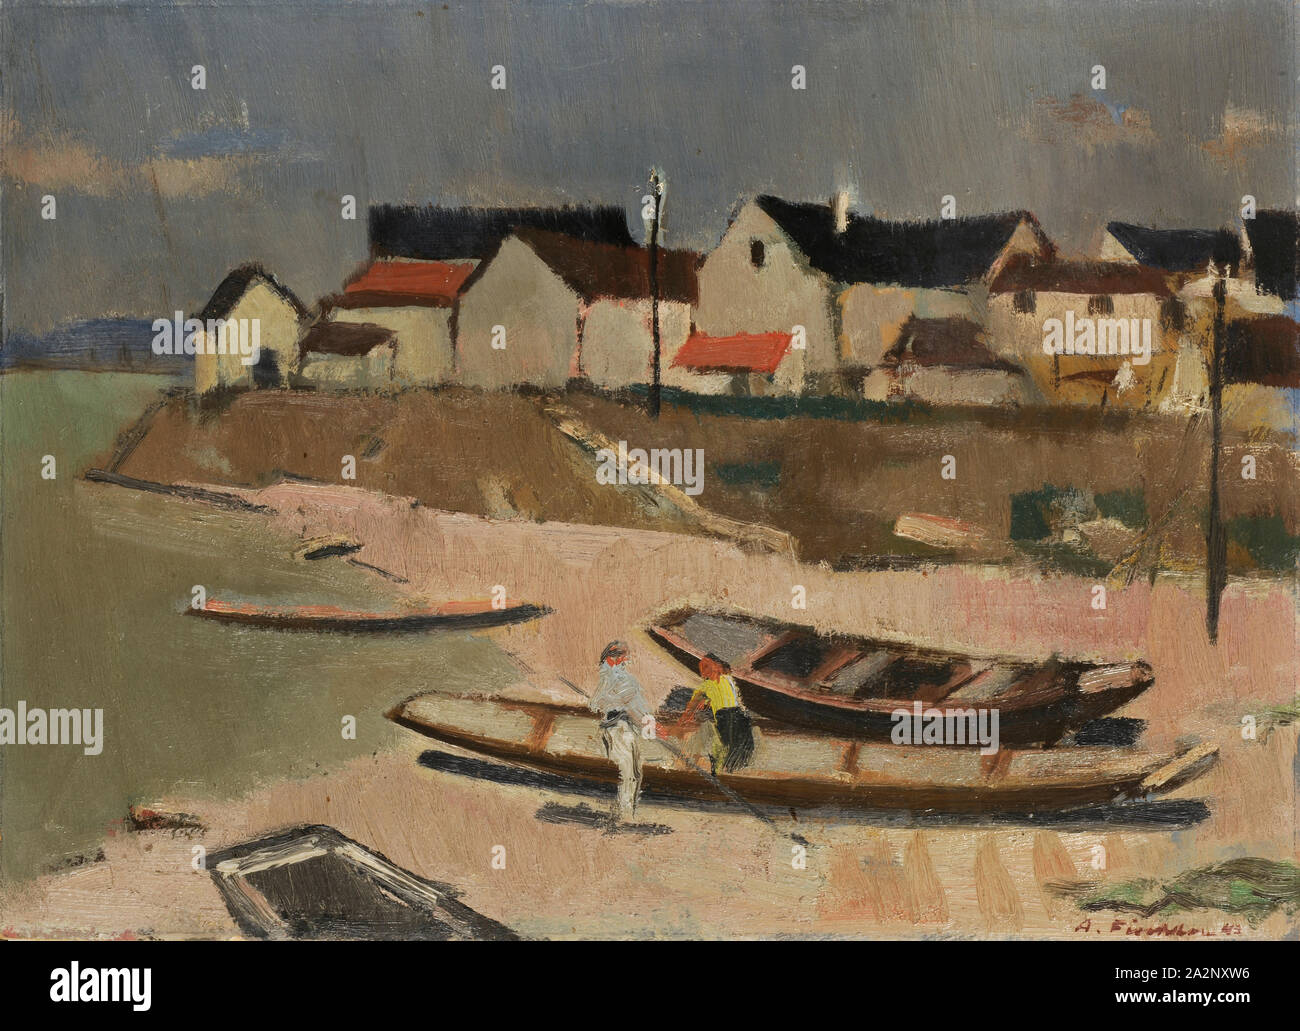 Fishing village in Baden, 1943, oil on board, 25 x 35 cm, signed and dated lower right: A. Fiechter 43, Arnold Fiechter, Sissach/Baselland 1879–1943 Basel Stock Photo